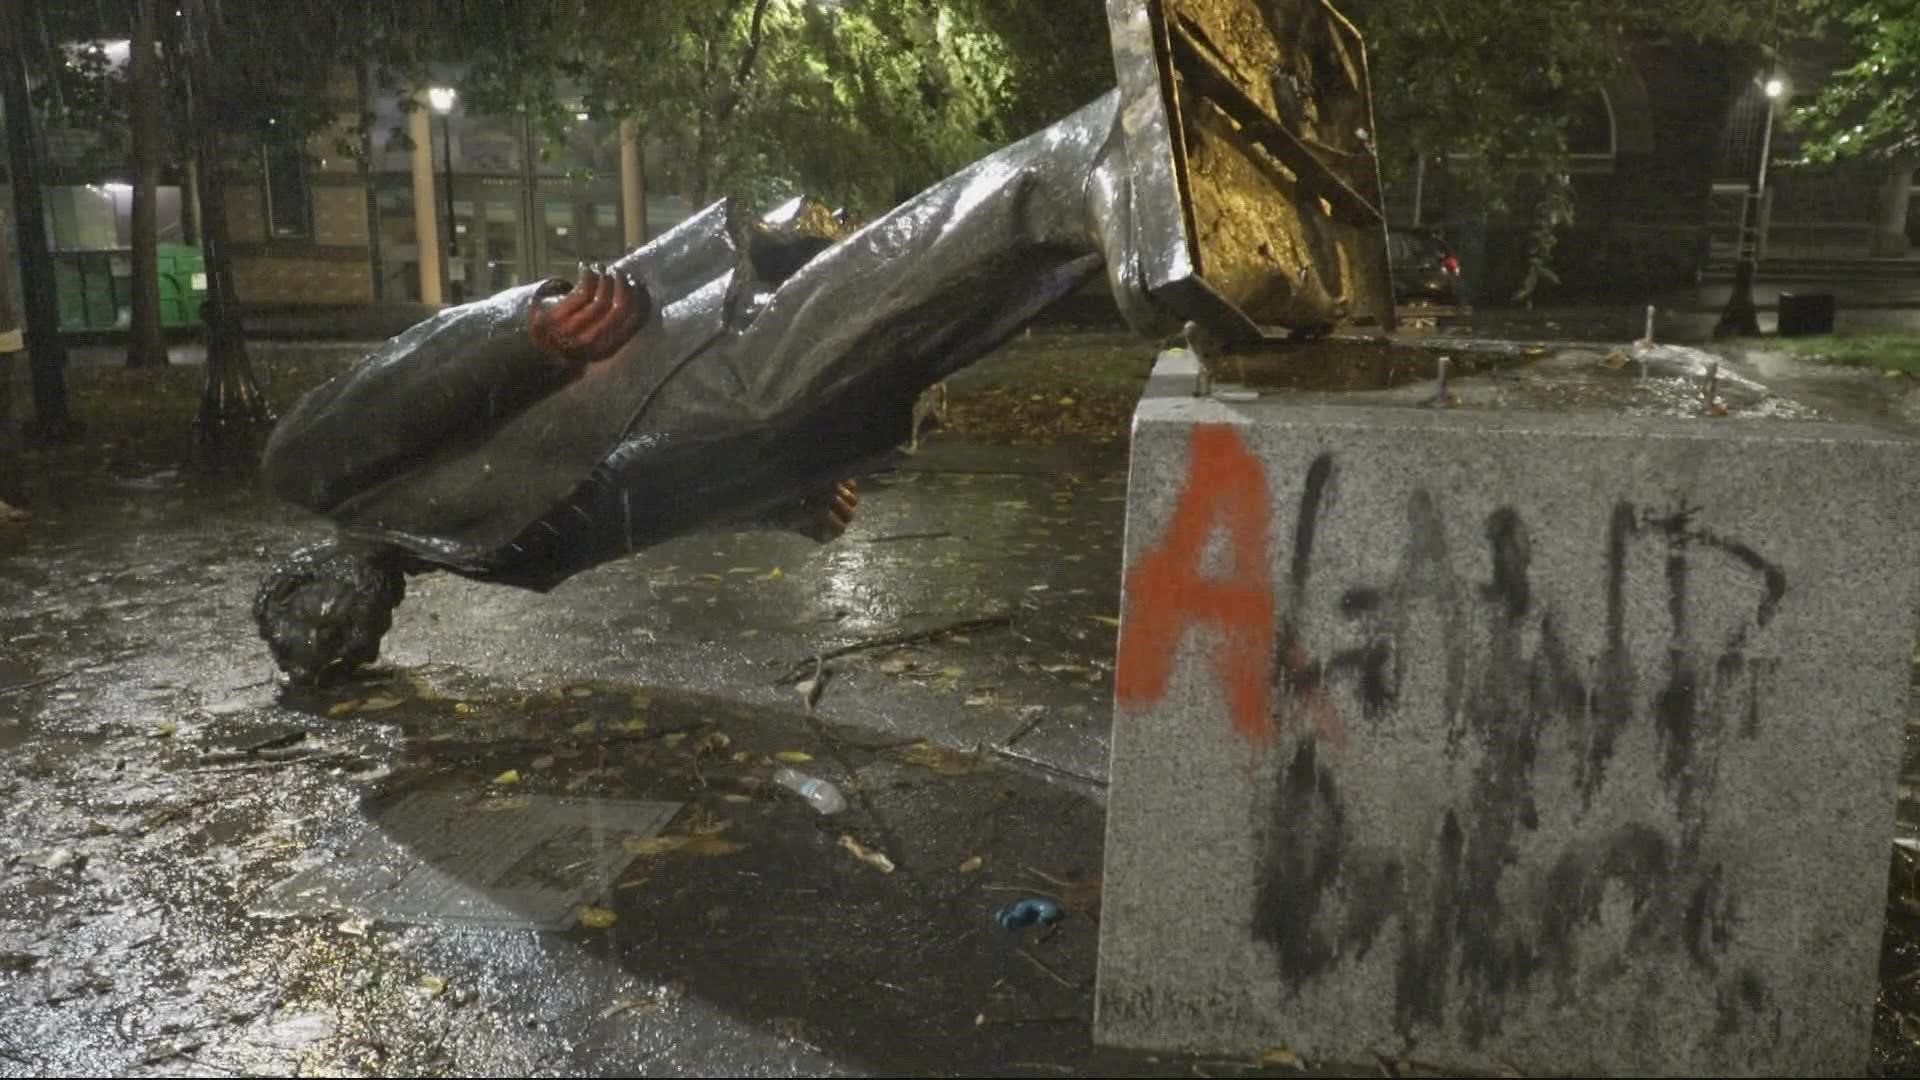 Protesters tore down the Lincoln and Roosevelt statues in downtown Portland's park blocks during last year's protests. They won't be returned to their original spot.